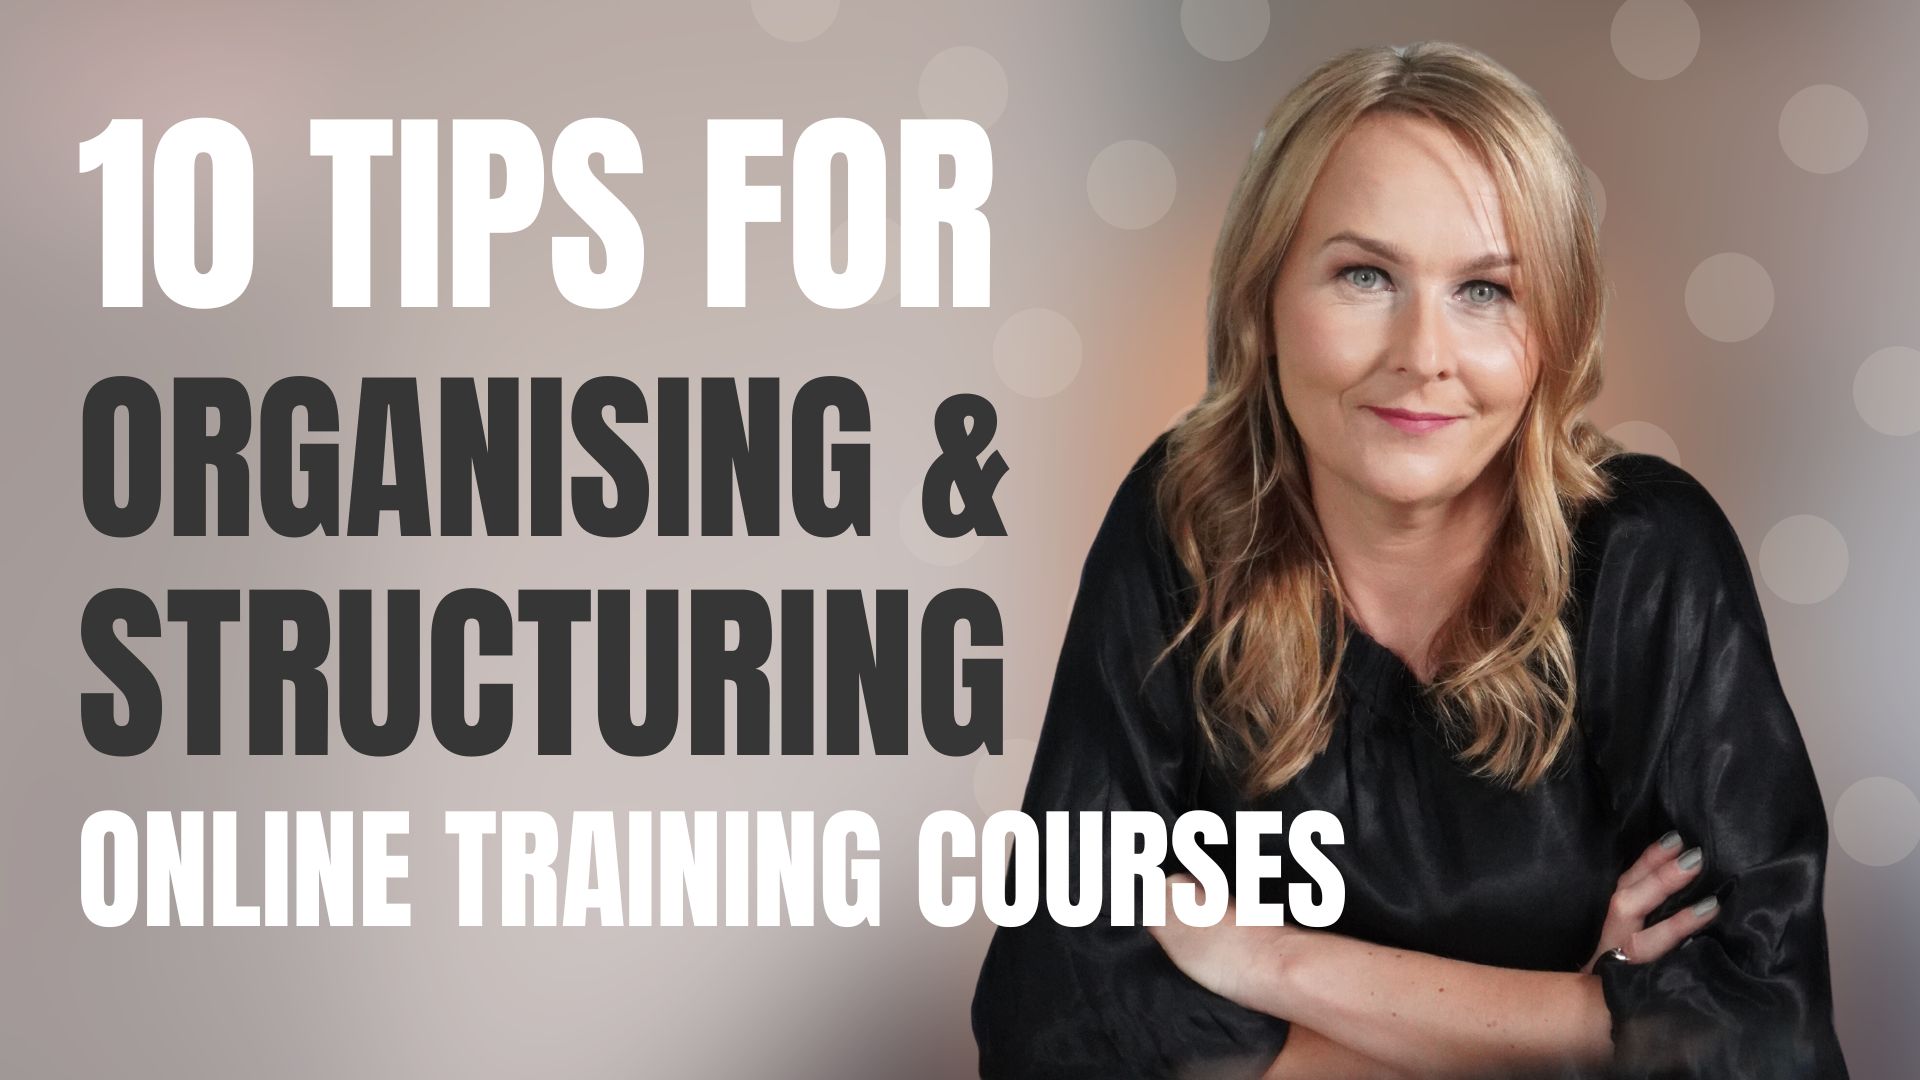 blog cover -Organising and structuring the content in your online course helps everyone enjoy the learning process and quickly find the sections needed. In this post I am sharing tips for organising and structuring the content of online training courses